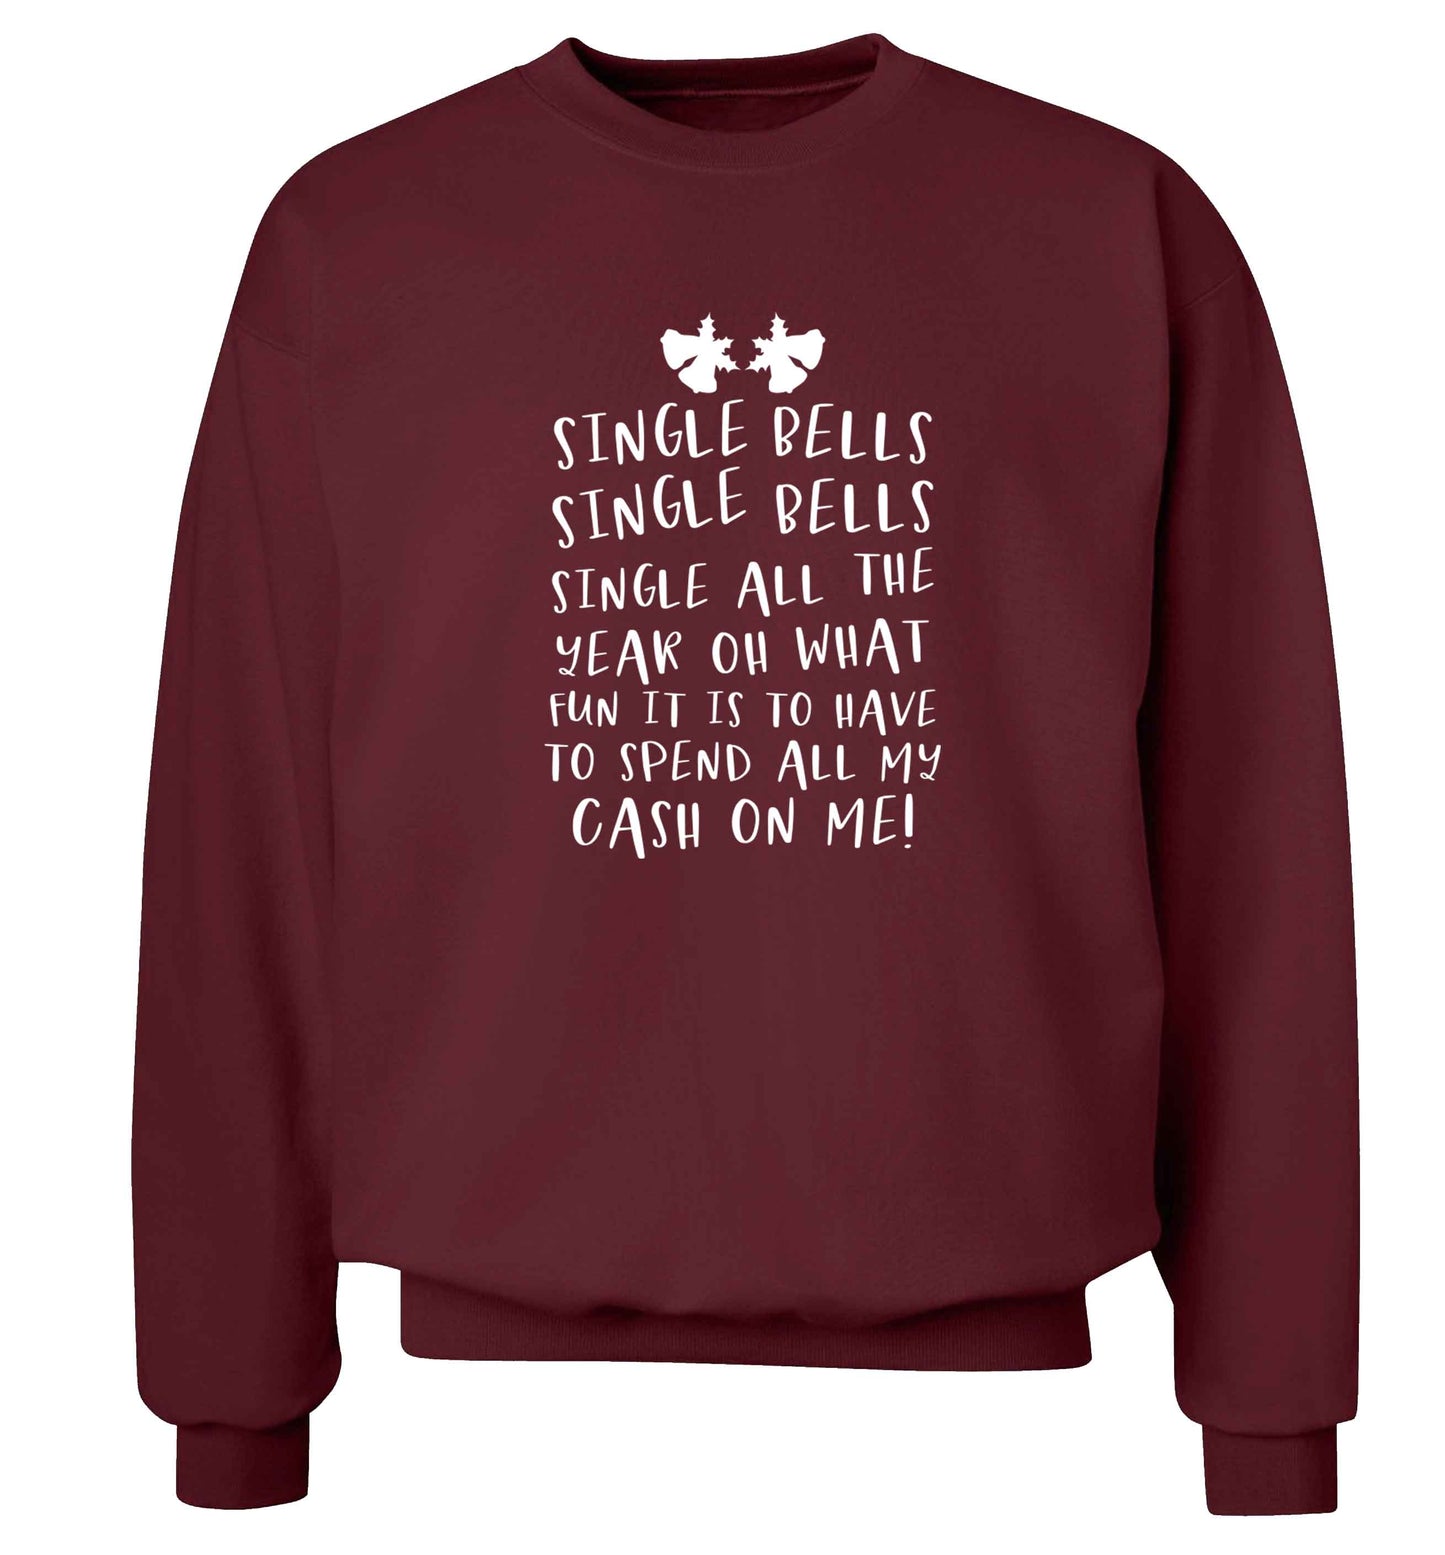 Single bells oh what fun it is to have to spend all my cash on me! Adult's unisex maroon Sweater 2XL